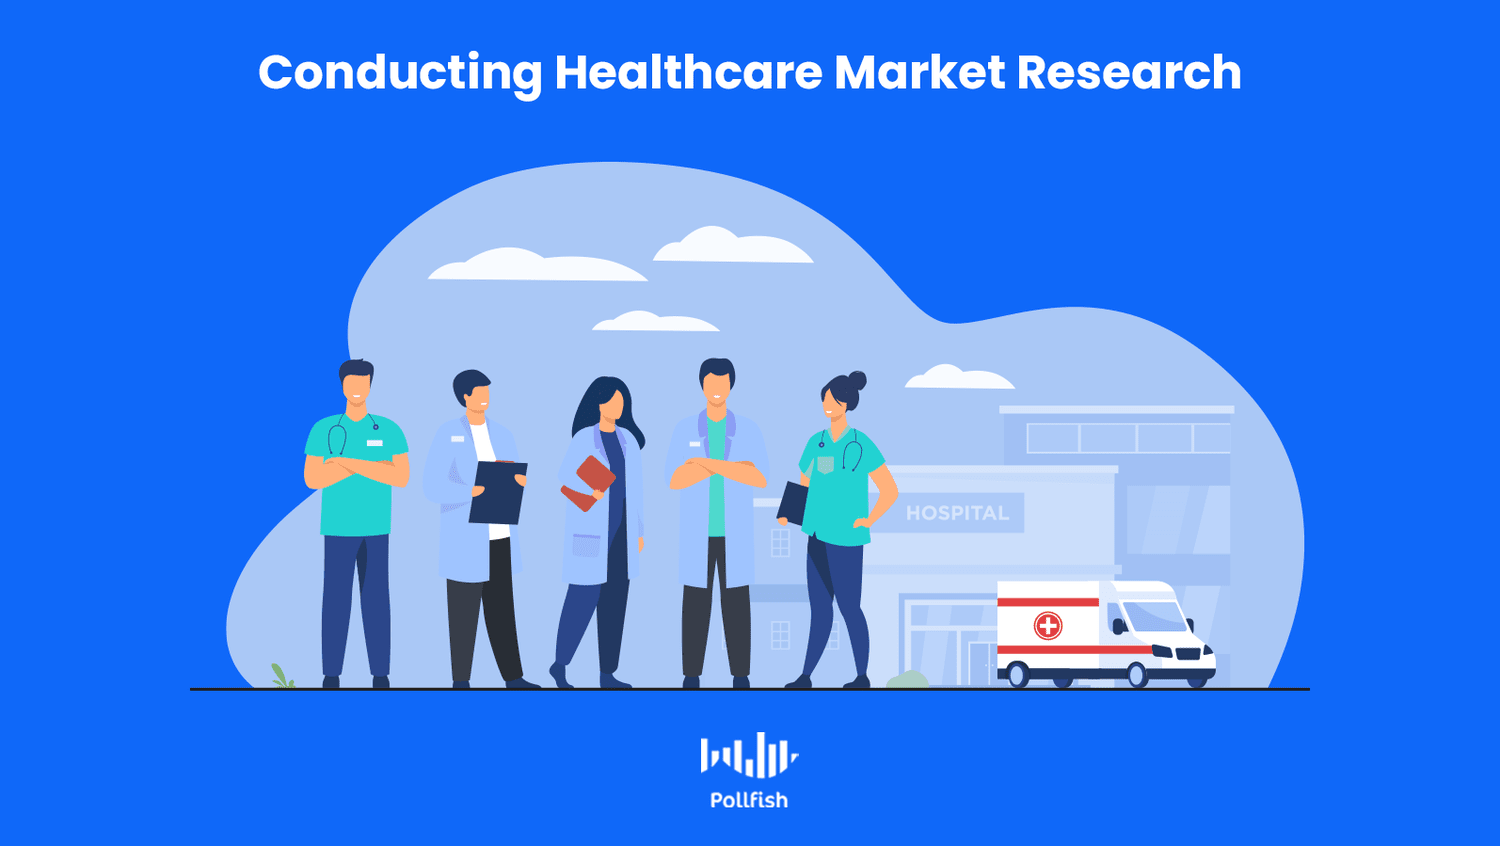 Healthcare market research picture